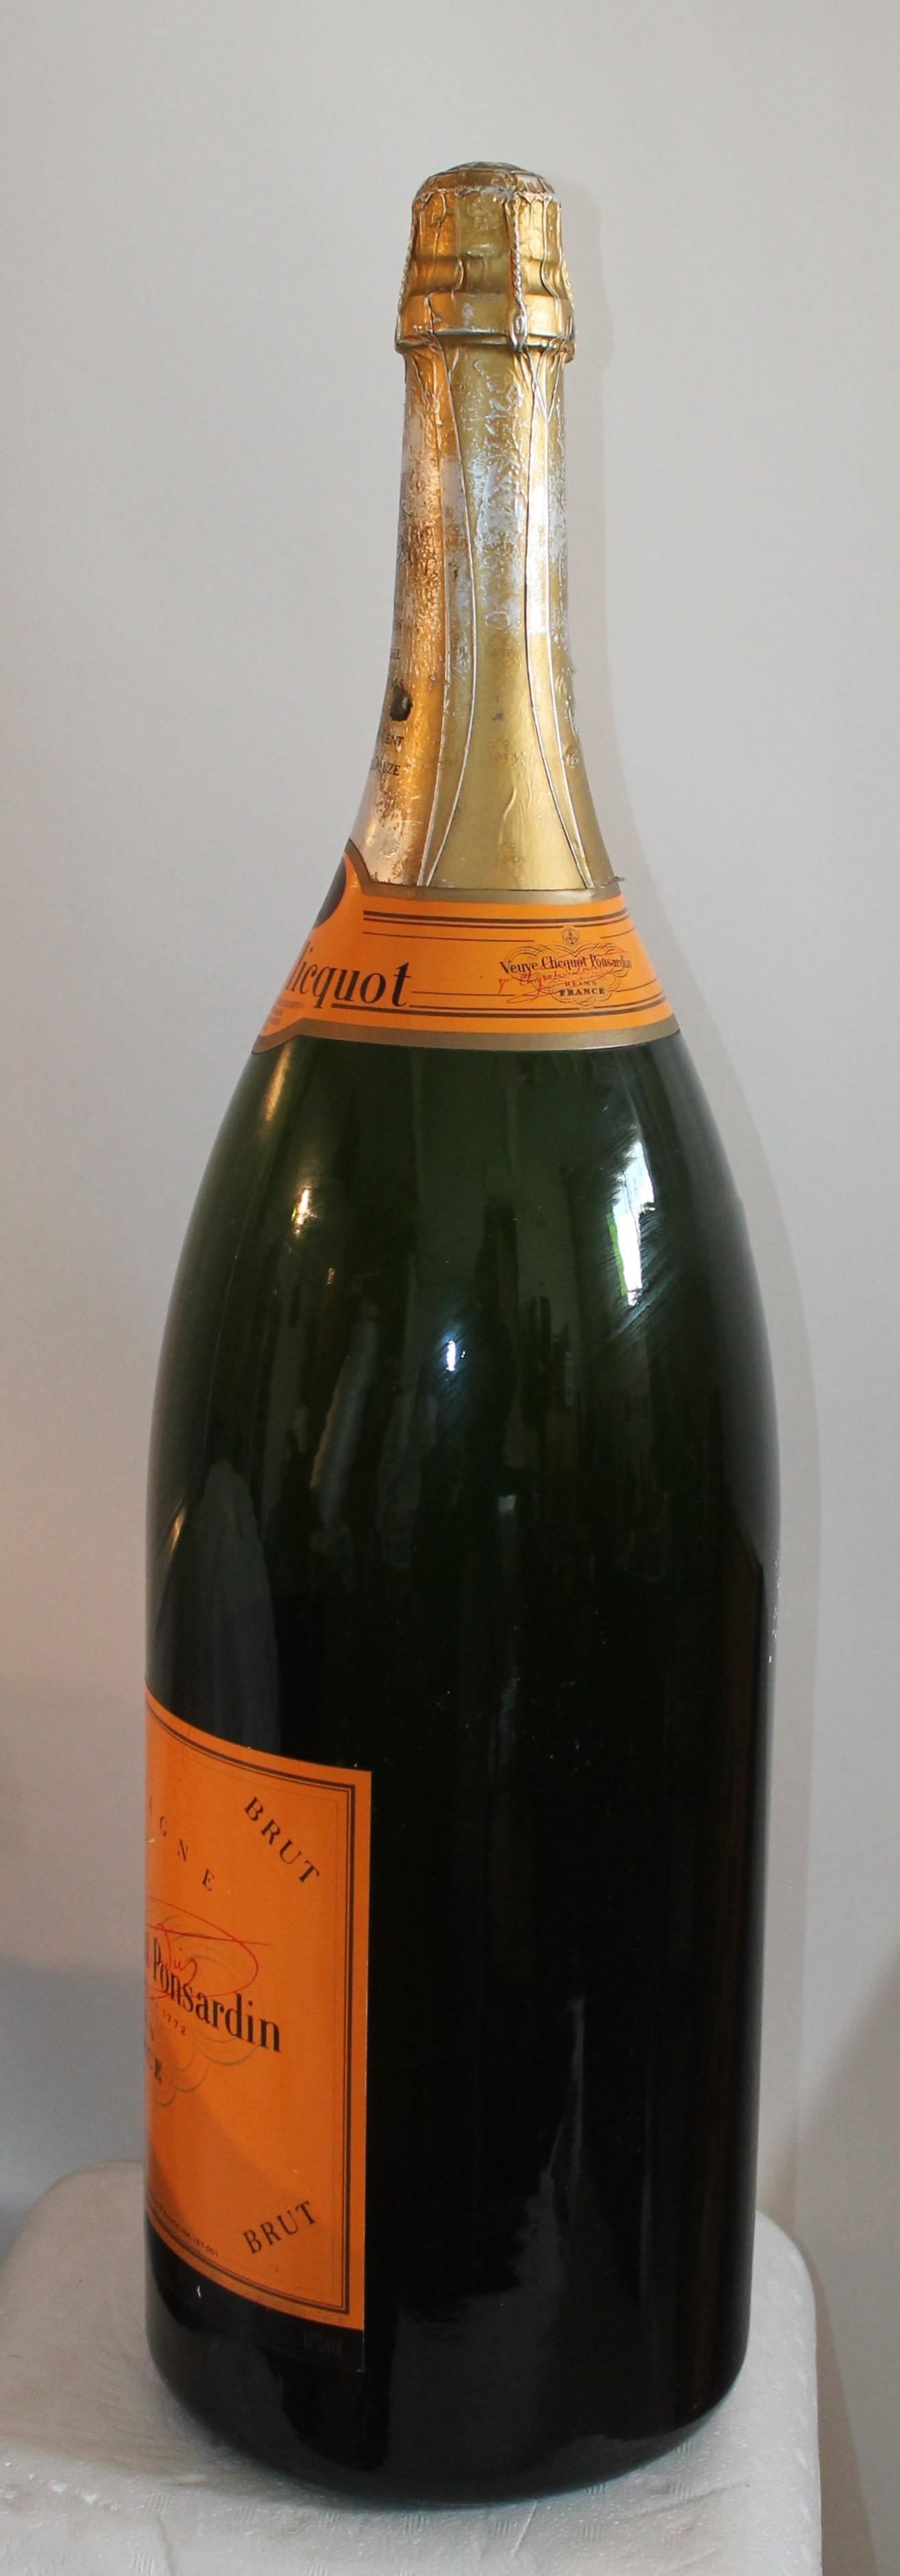 Veuve Clicquot Champagne bottle from a bar display or storefront. Great as found condition.